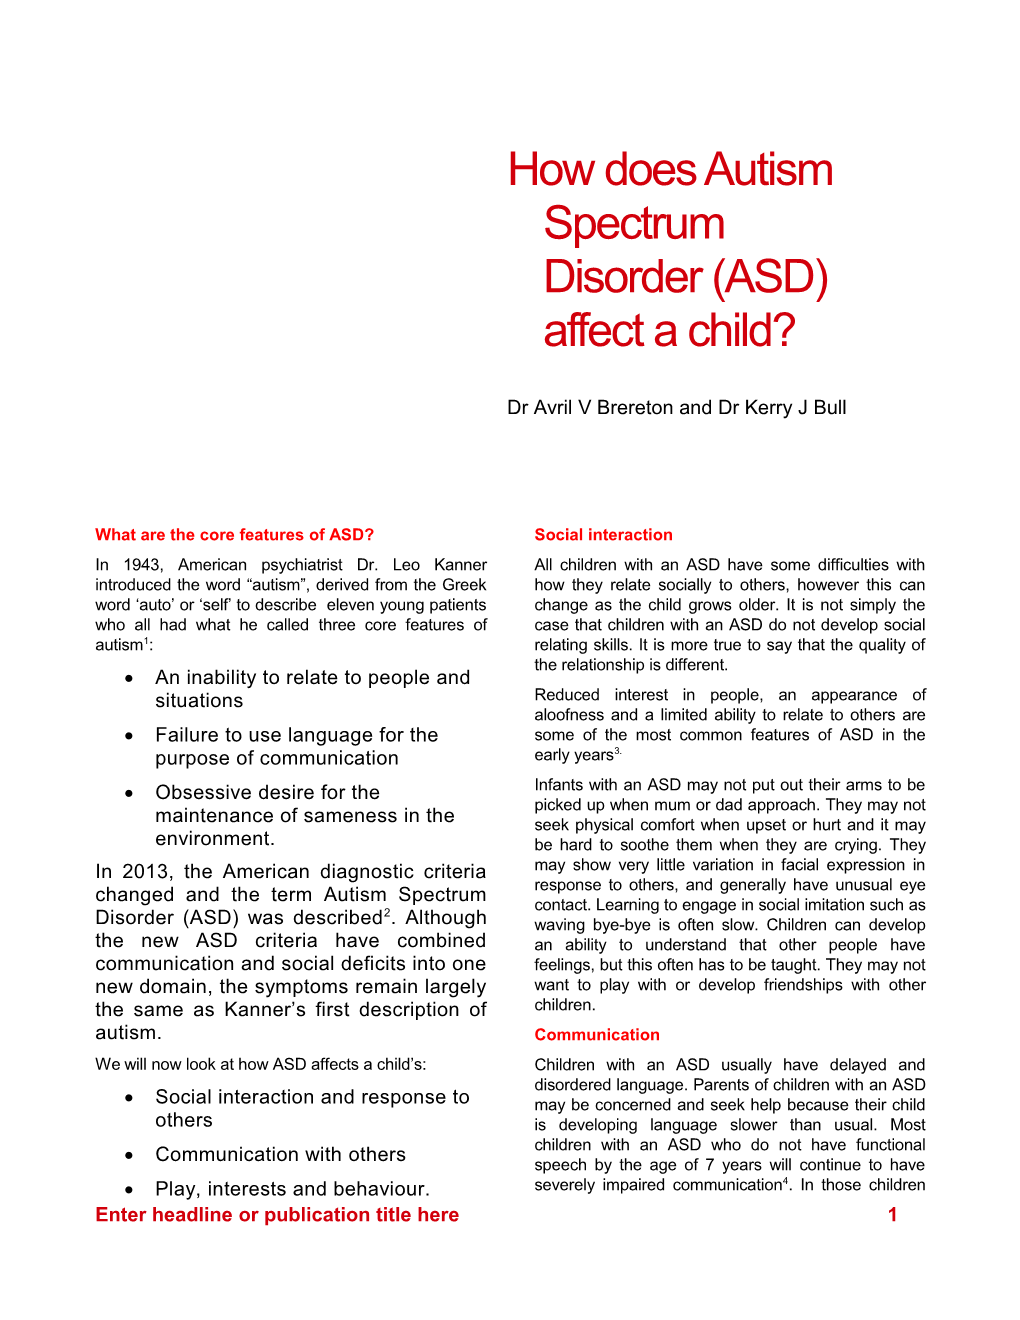 How Does Autism Spectrum Disorder (ASD) Affect a Child?